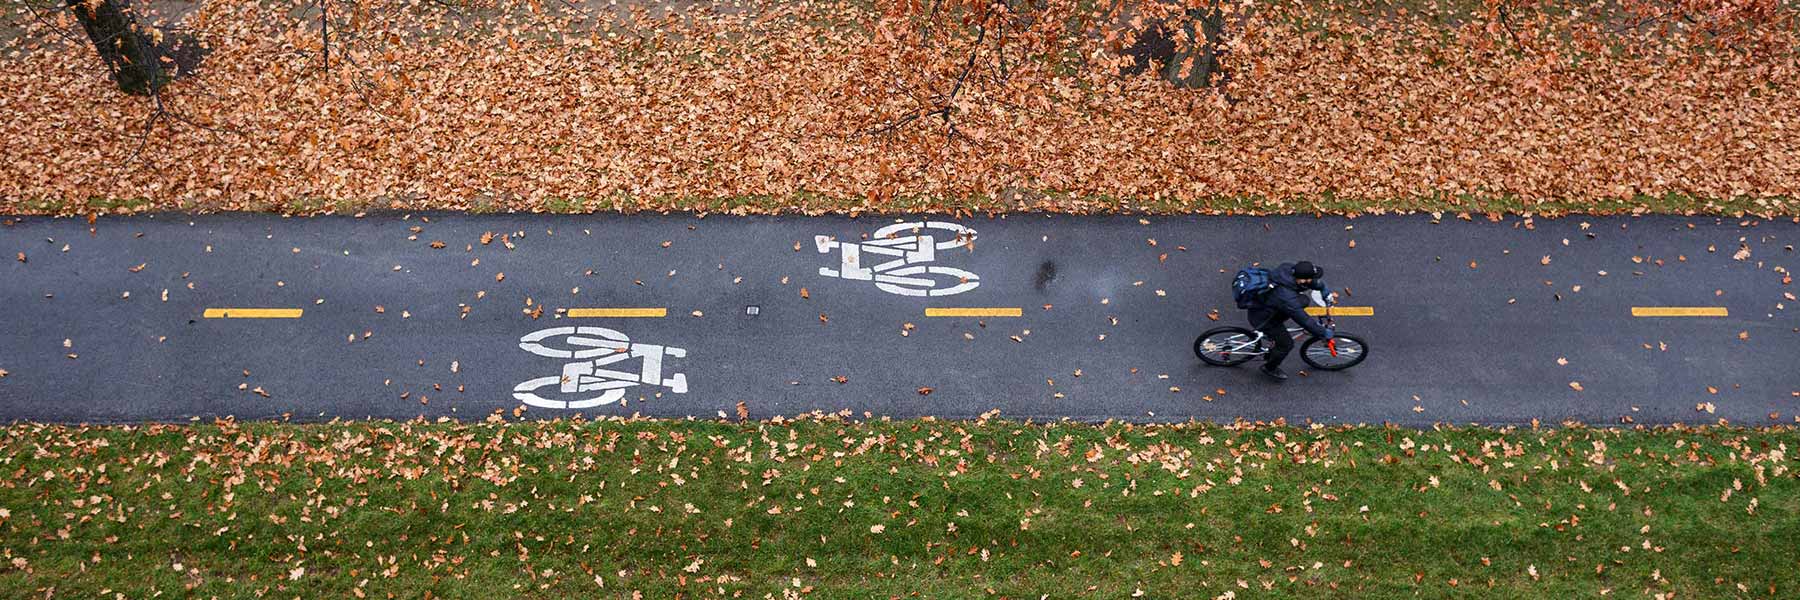 A person rides a bike on a bike path in the fall.